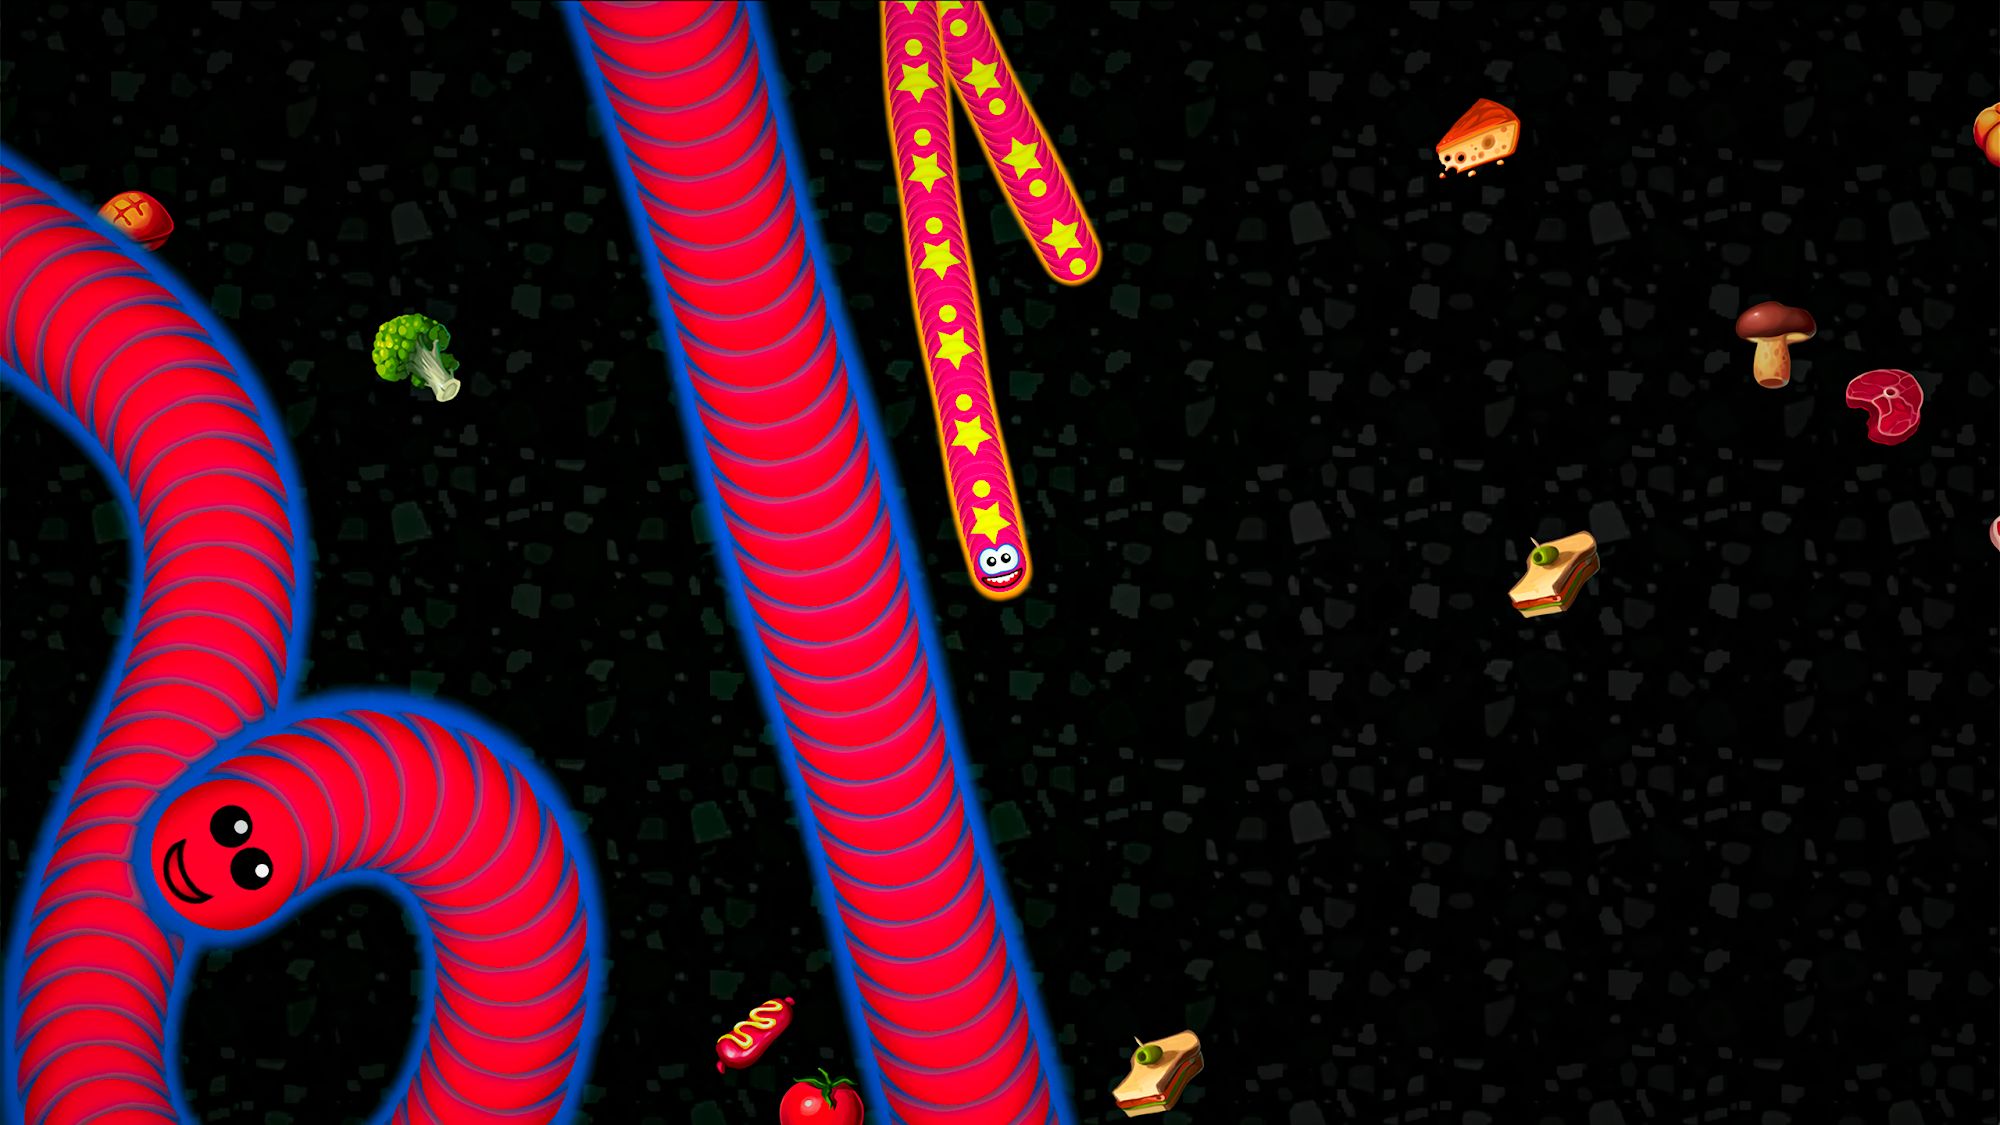 🔥 Download Snakeio Fun Addicting Arcade Battle io Games 1.18.66 [unlocked]  APK MOD. Compete with players from all over the world in a vibrant arcade 